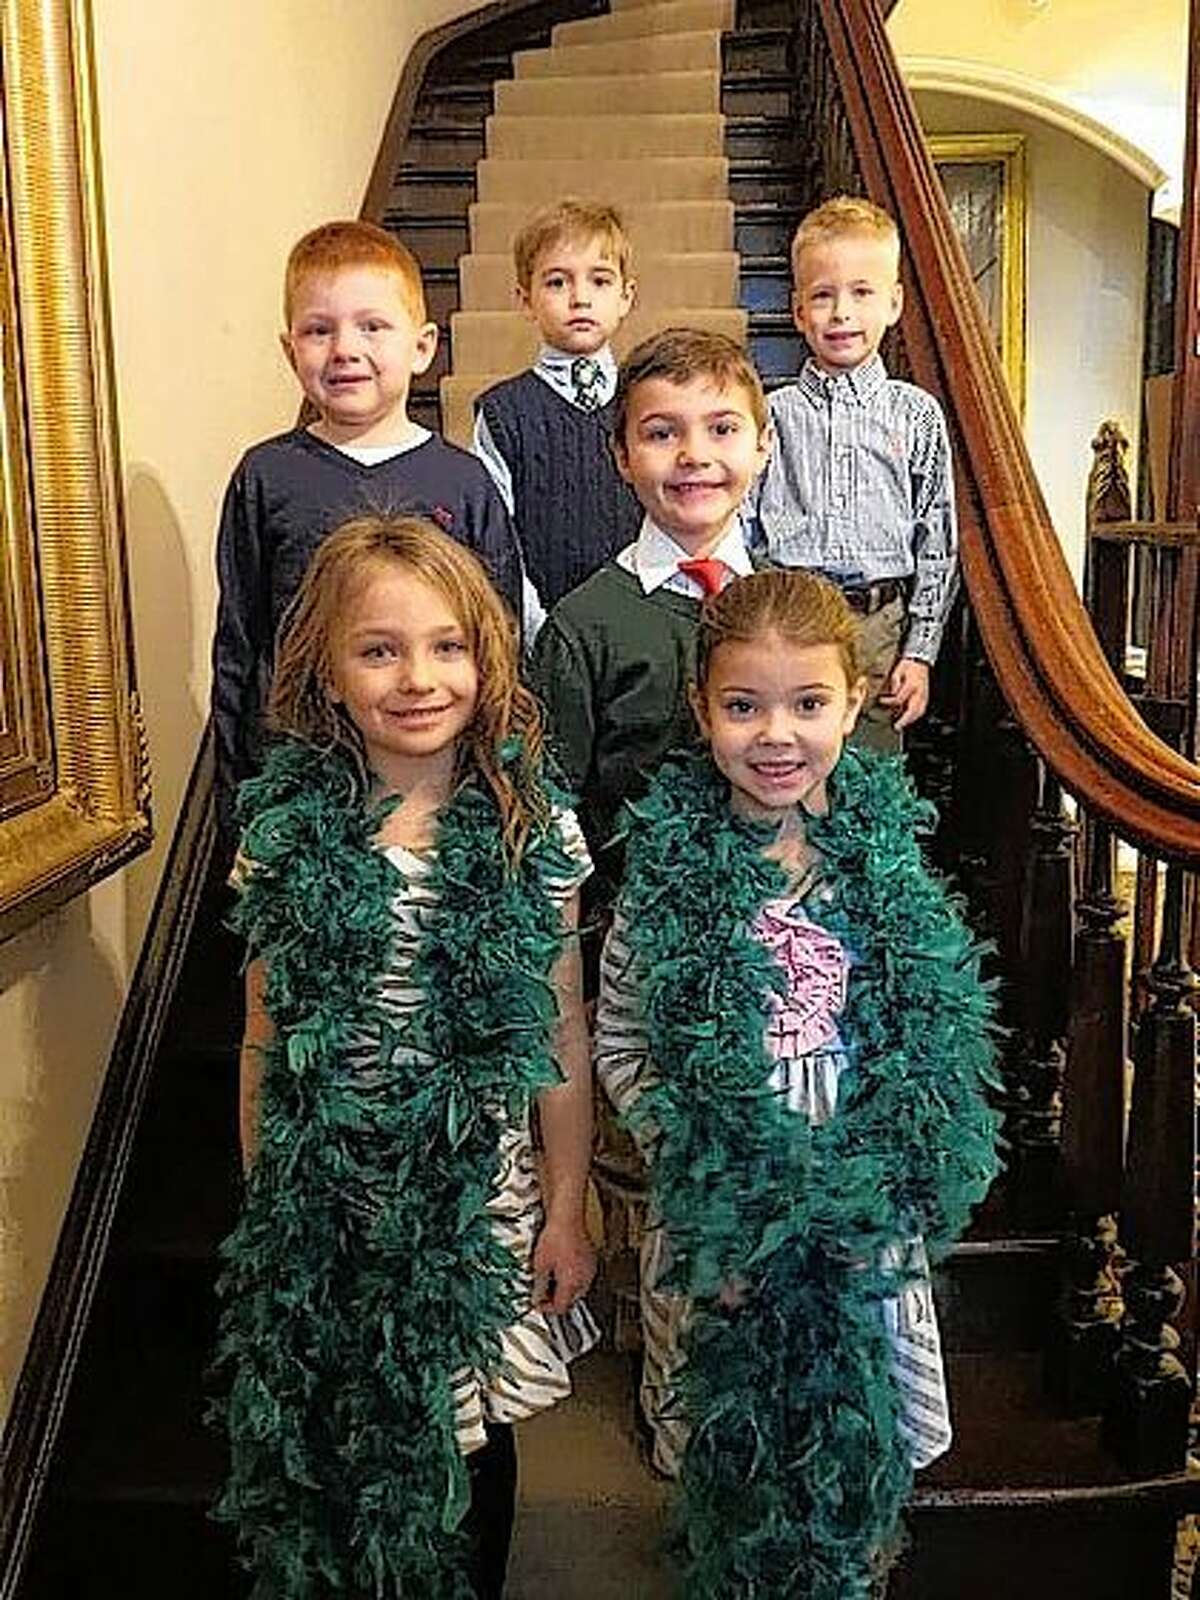 These children will participate in this year’s Beaux Arts Ball as flower girls and pages. In front are Millie Grace Schumacher and Lillie Evelyn Adeline Brown. In back are Andrew Darrin Seymour, Parker Jackson Henry, Jett Morrisey and Lennox Porter Davidsmeyer. Not pictured are Finley Anne York, Benjamin Jacob Meyer and Gabriel John Pratt.